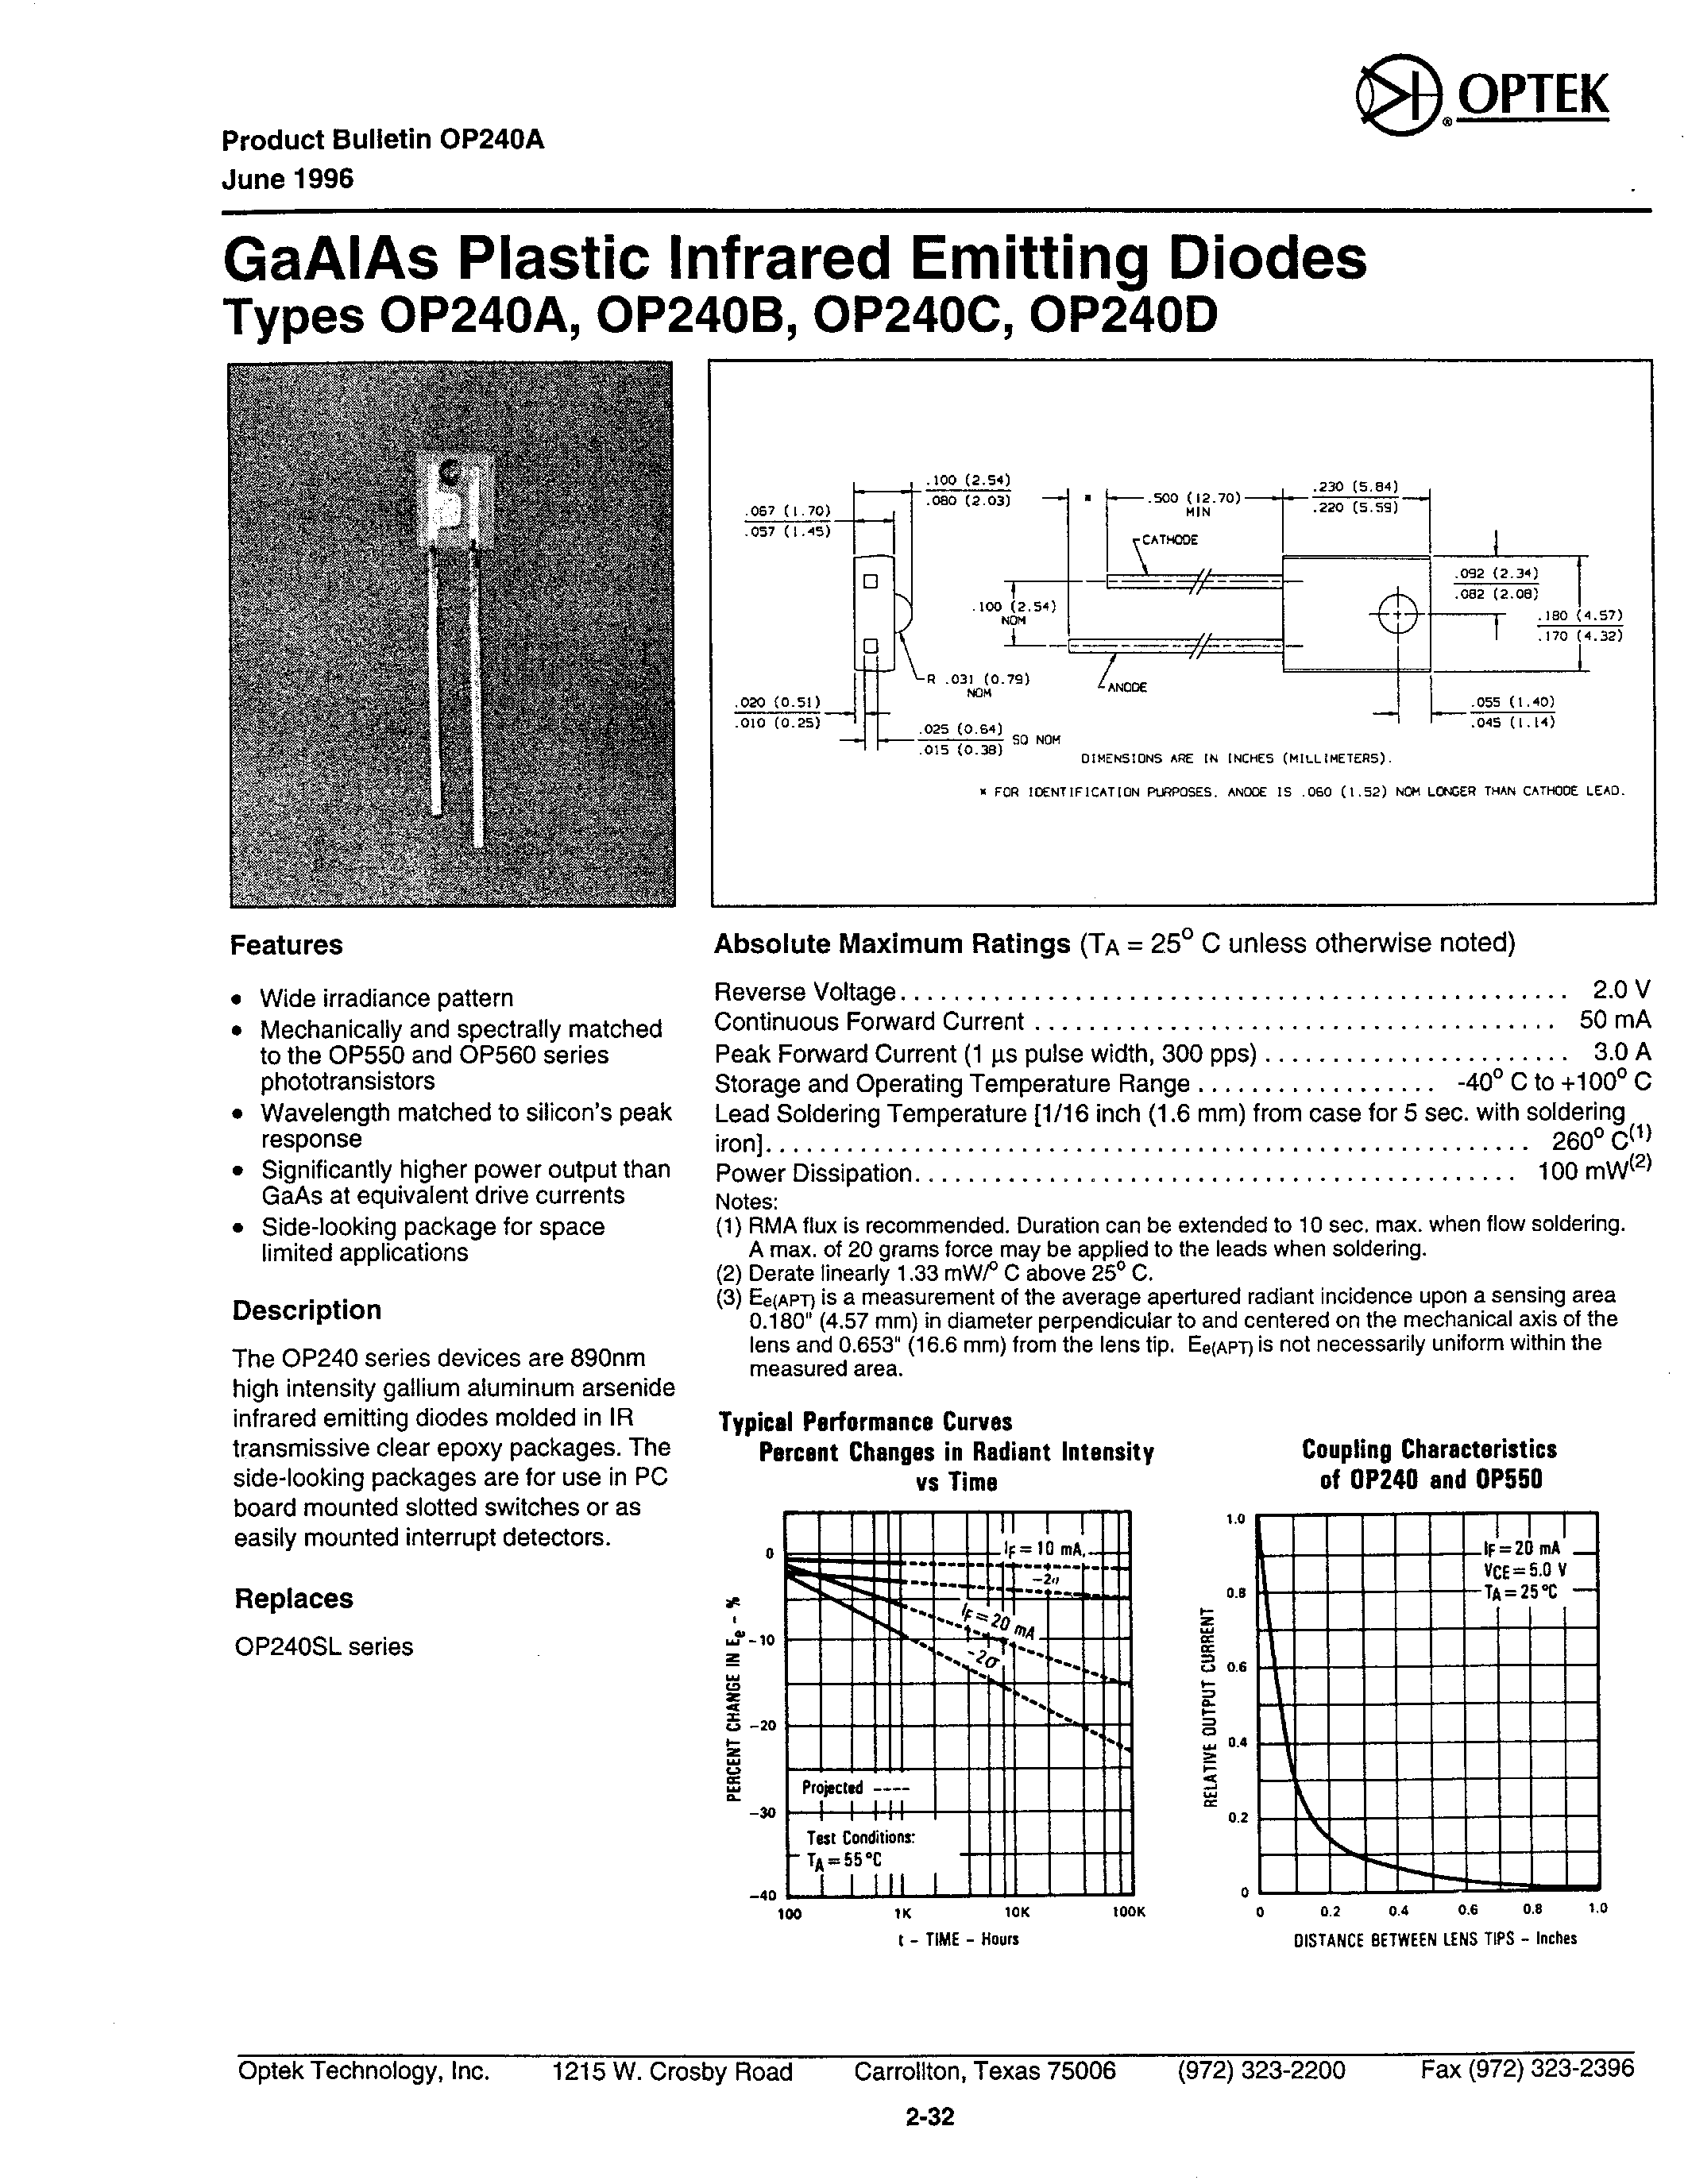 Даташит OP240A-GAAIAS PLASTIC INFRARED EMITTING DIODES страница 1